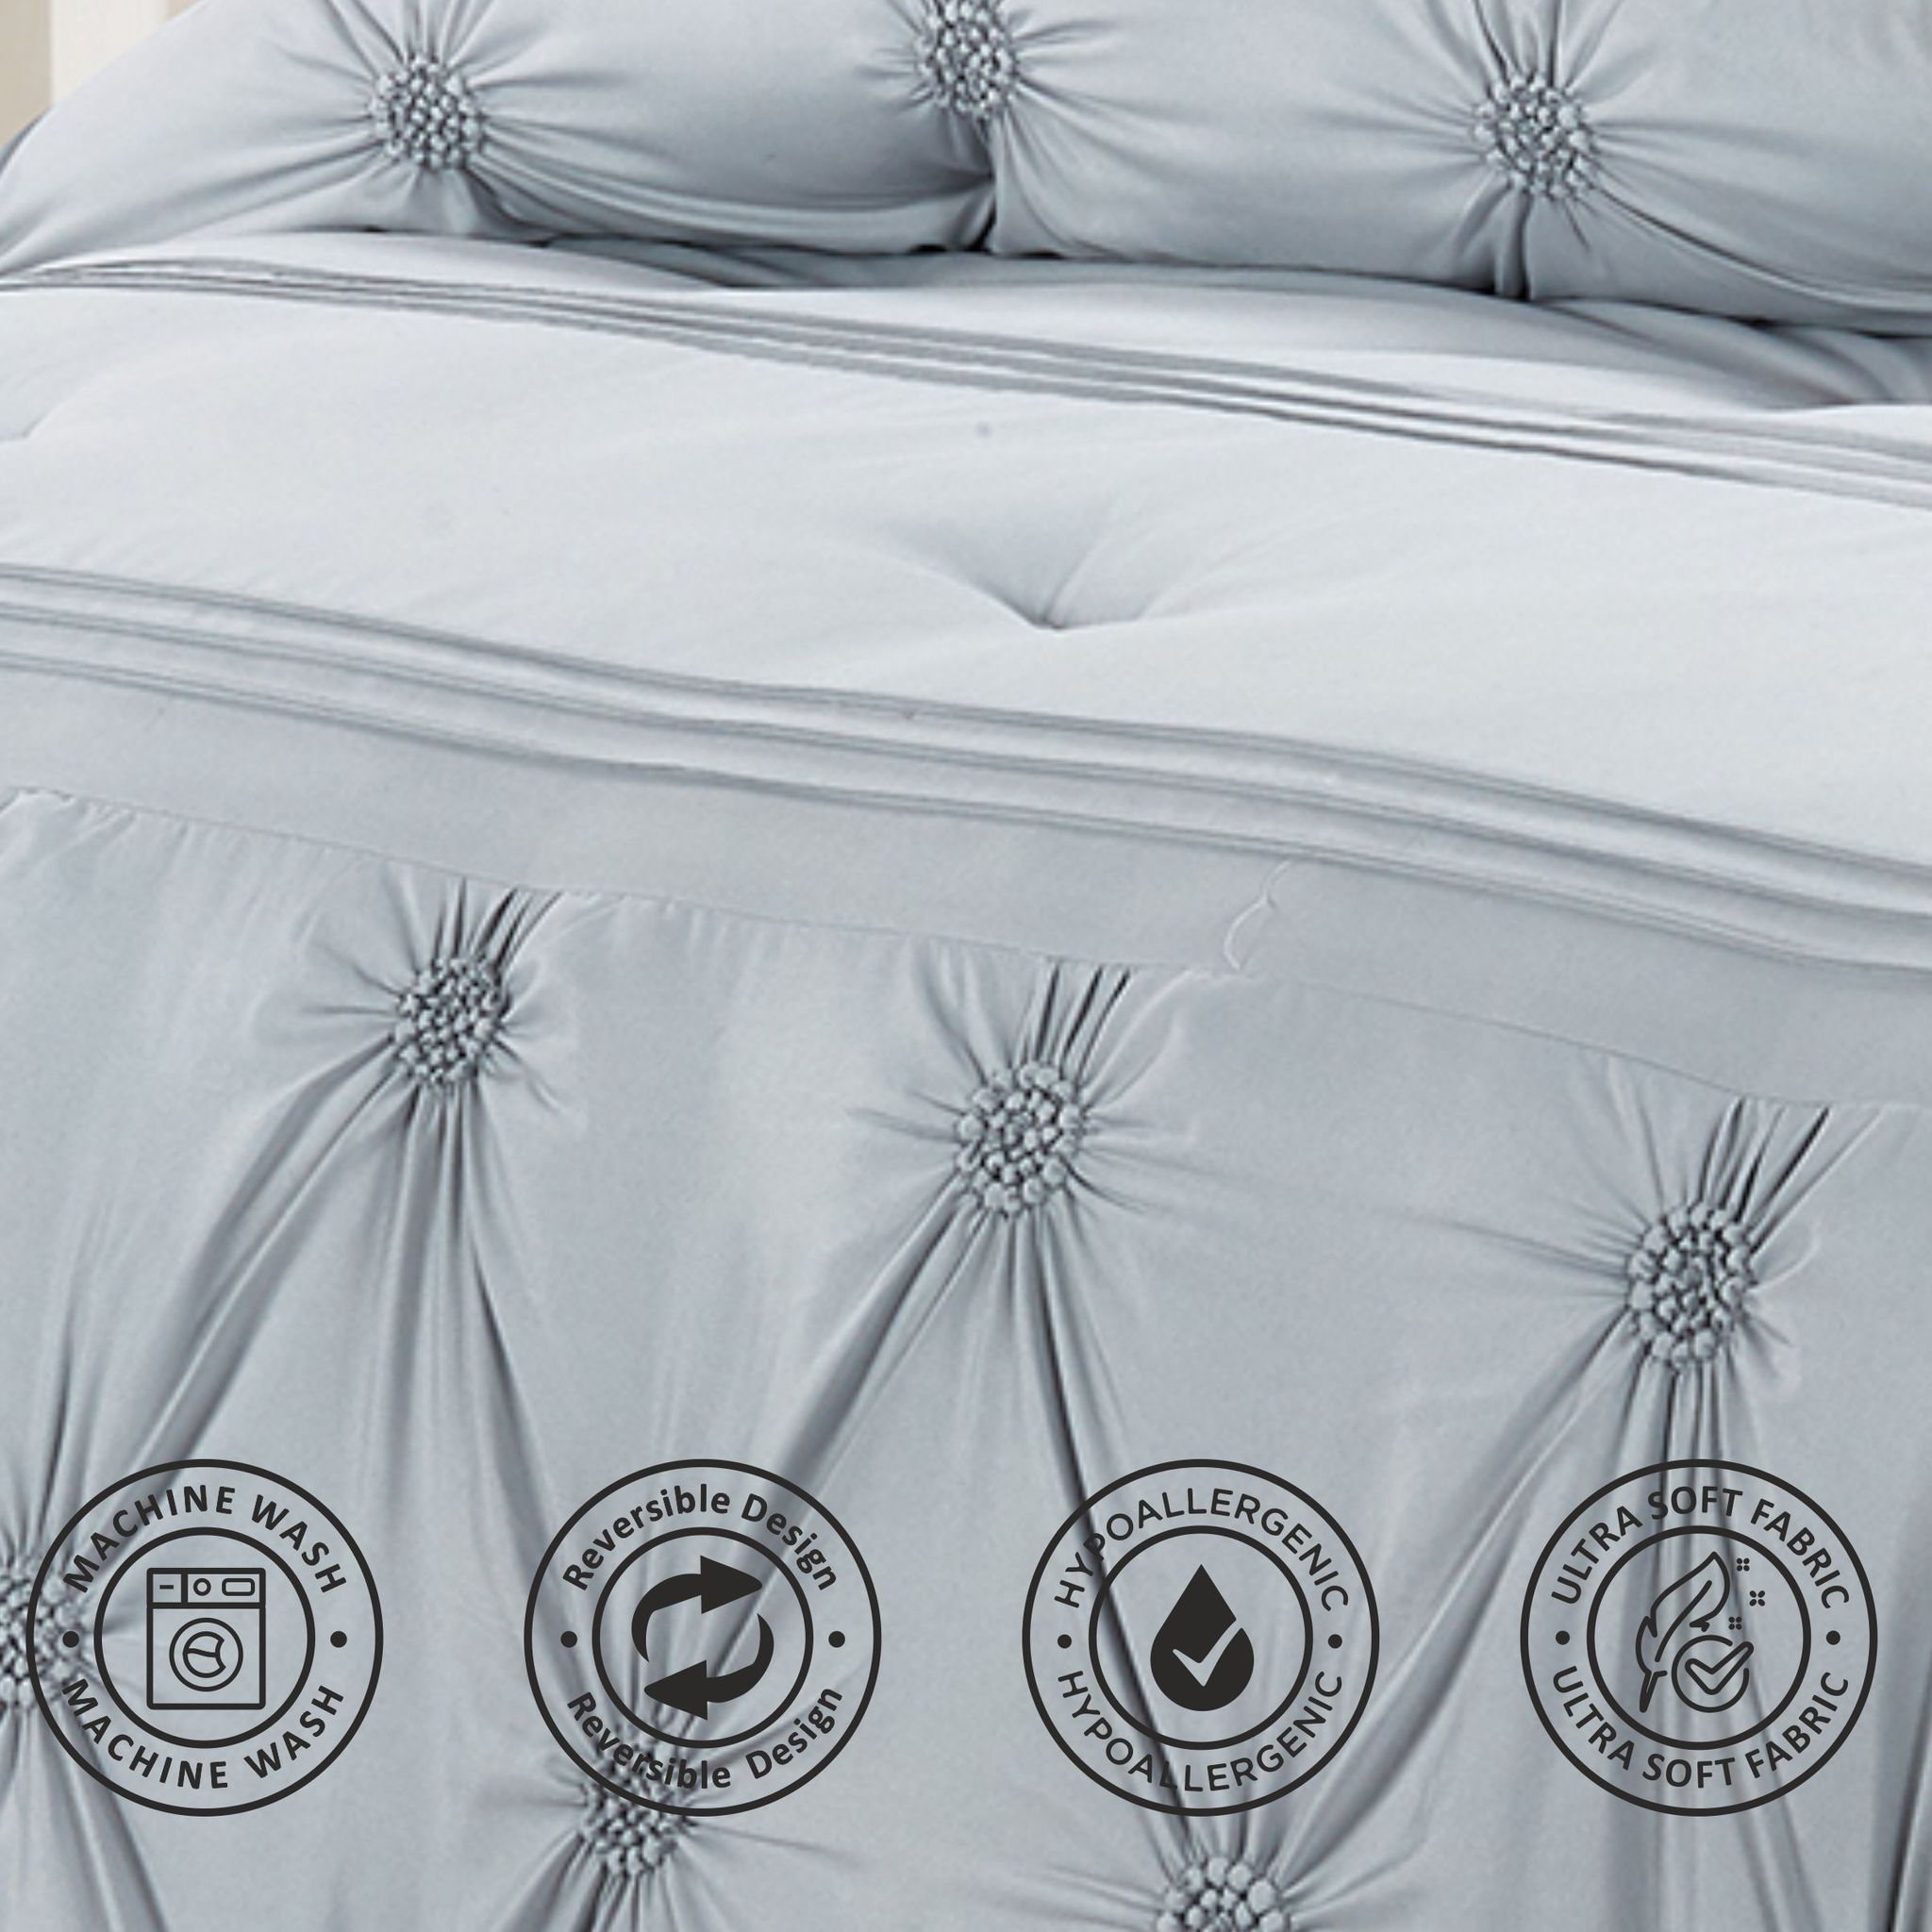 Bubble Embroidered Comforter Set 4-Piece Twin Silver Grey